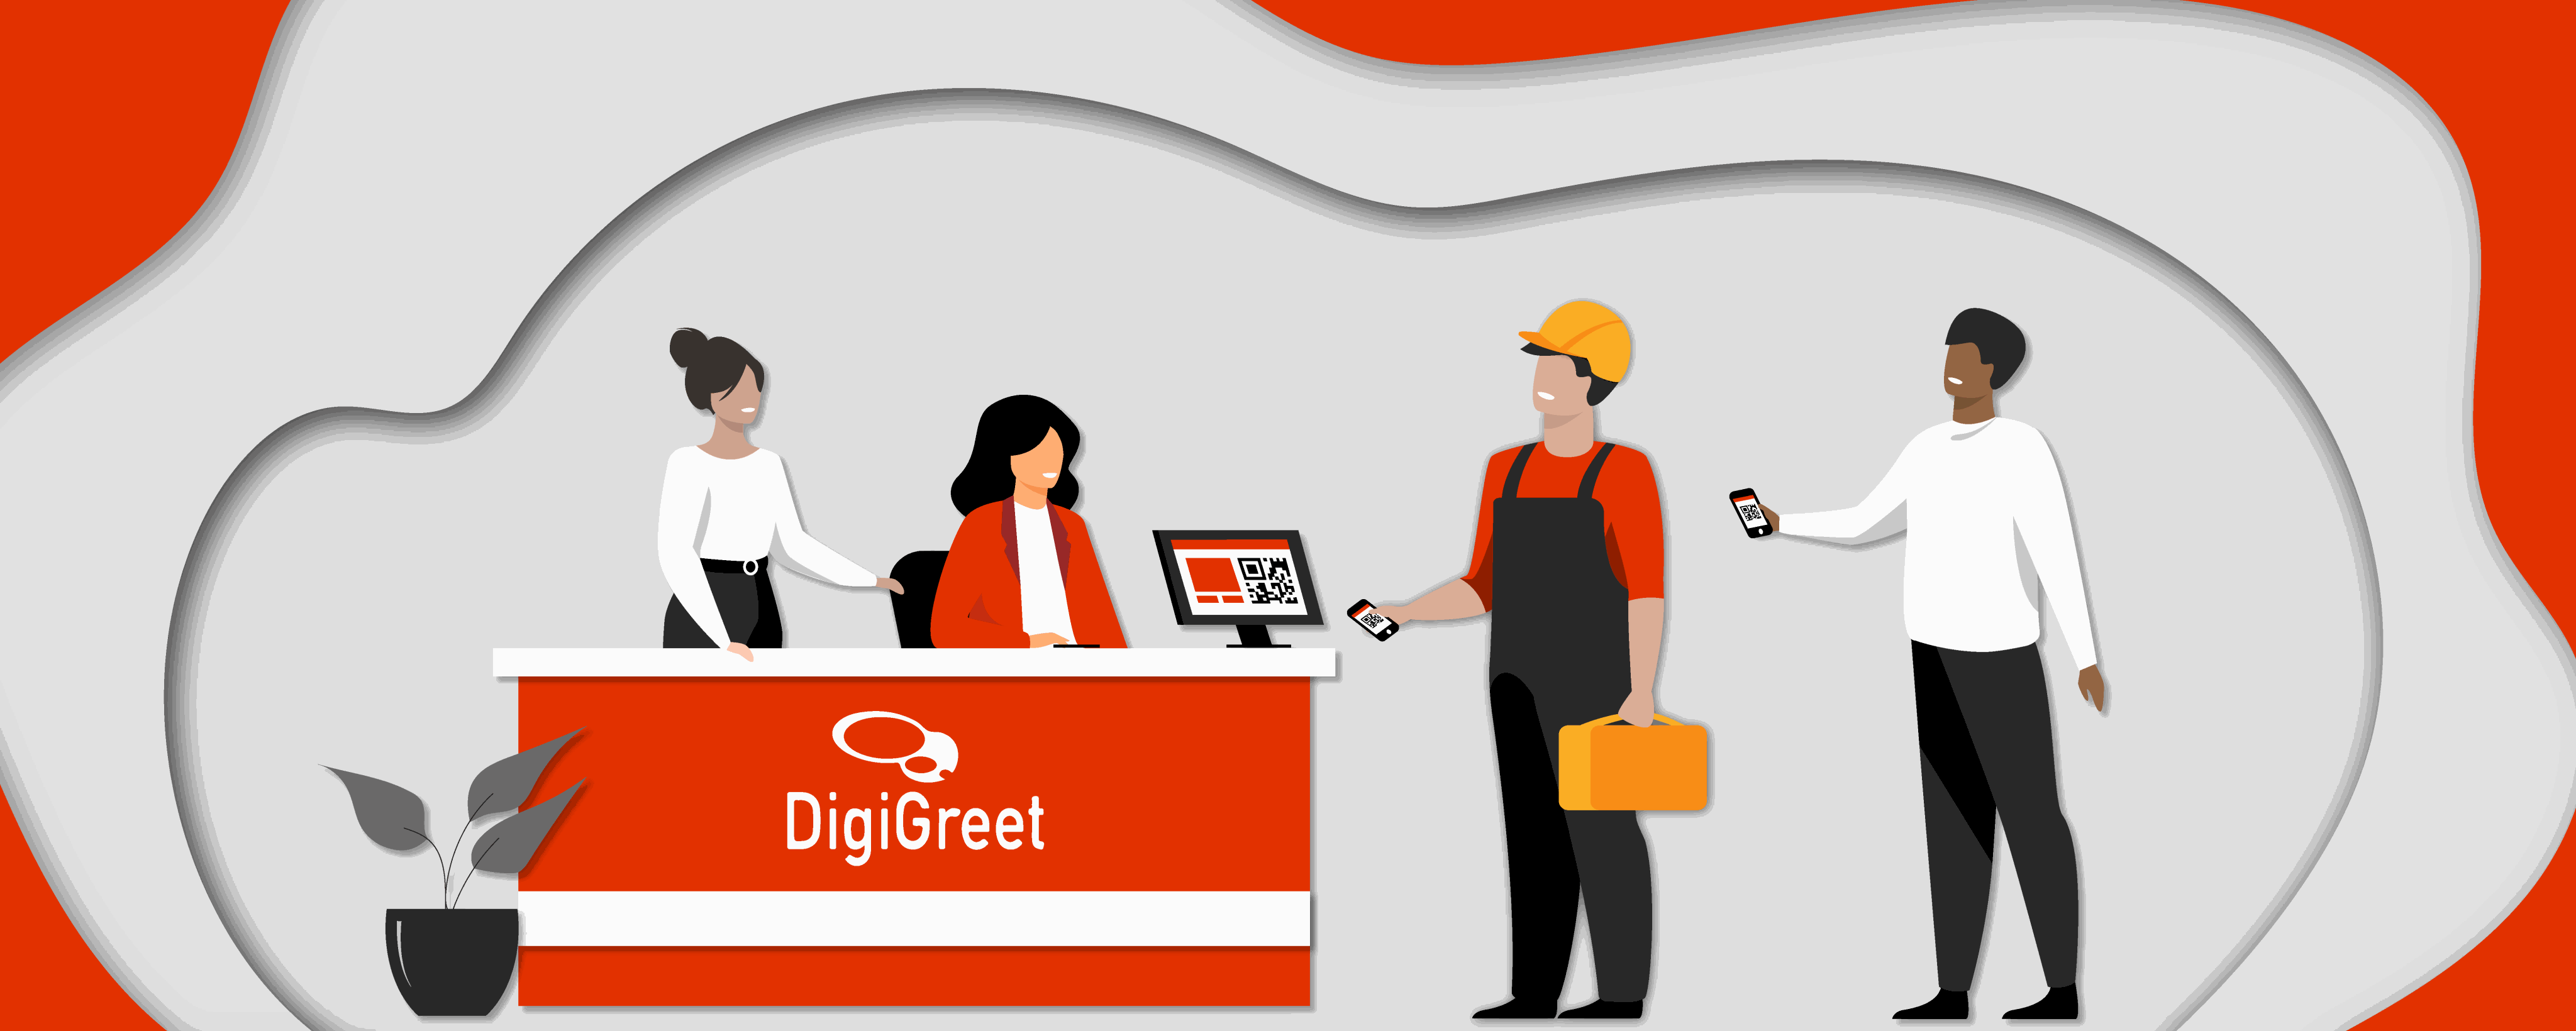 DigiGreet releases automated Covid Pass verification system